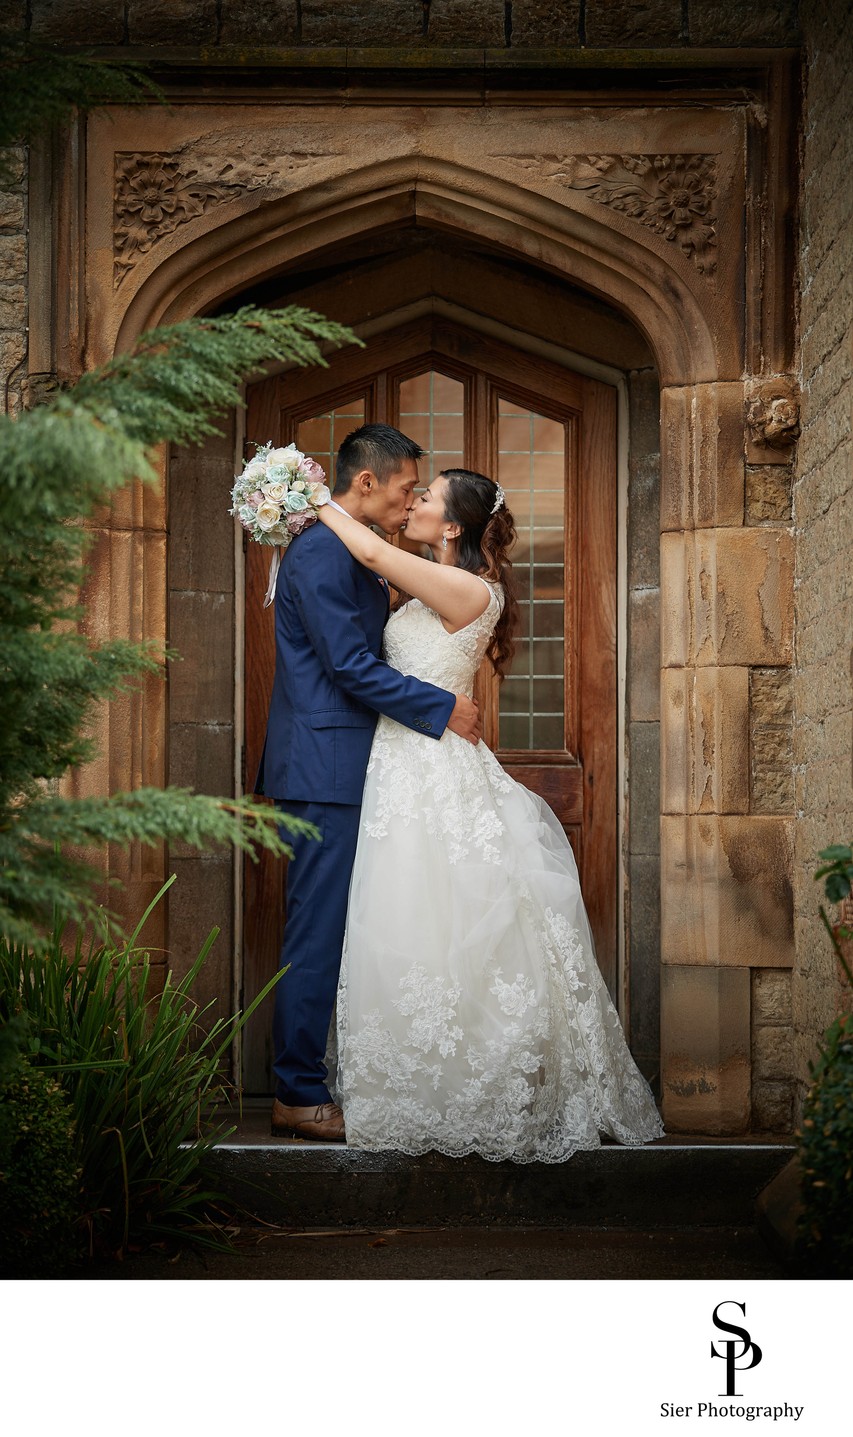 Kiss in the Doorway at Kenwood Hall Hotel Sheffield